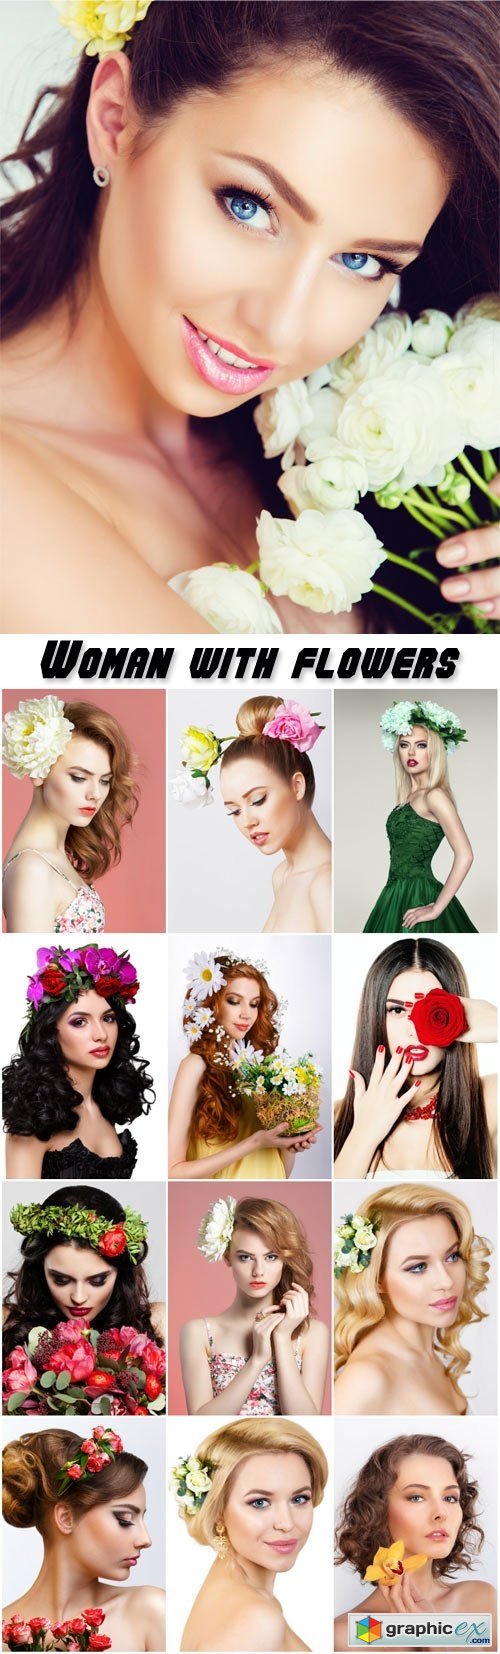 Alluring woman with flowers